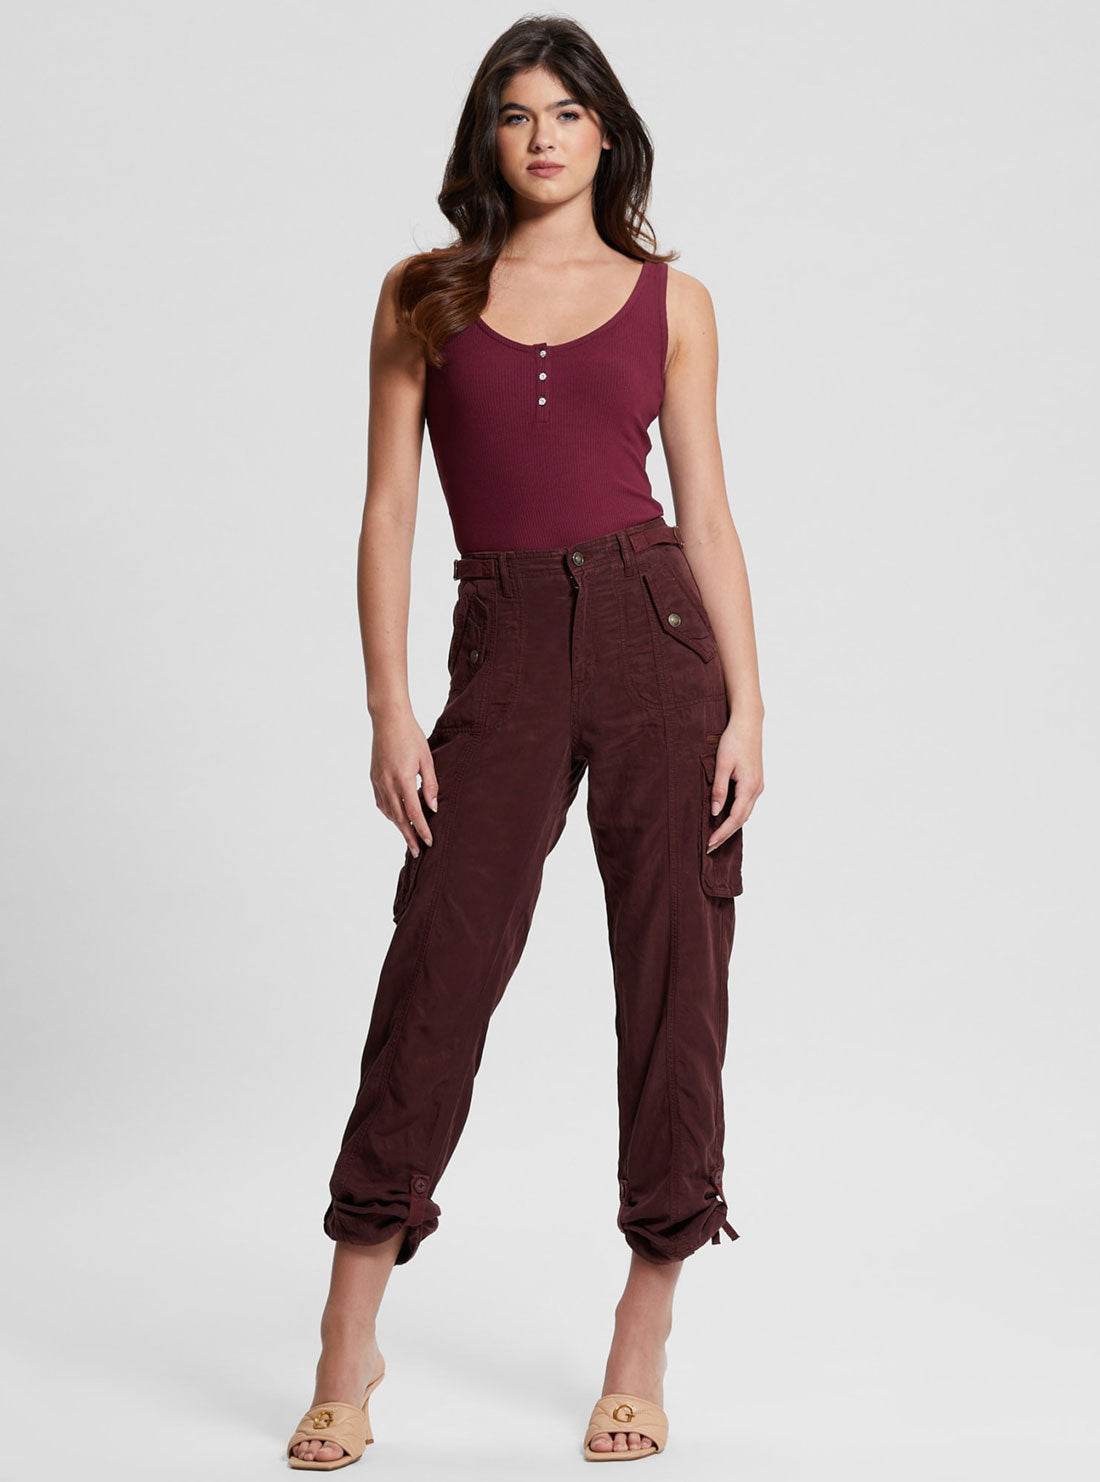 Eco Maroon Nessi Cargo Pants | GUESS Women's Apparel | full view